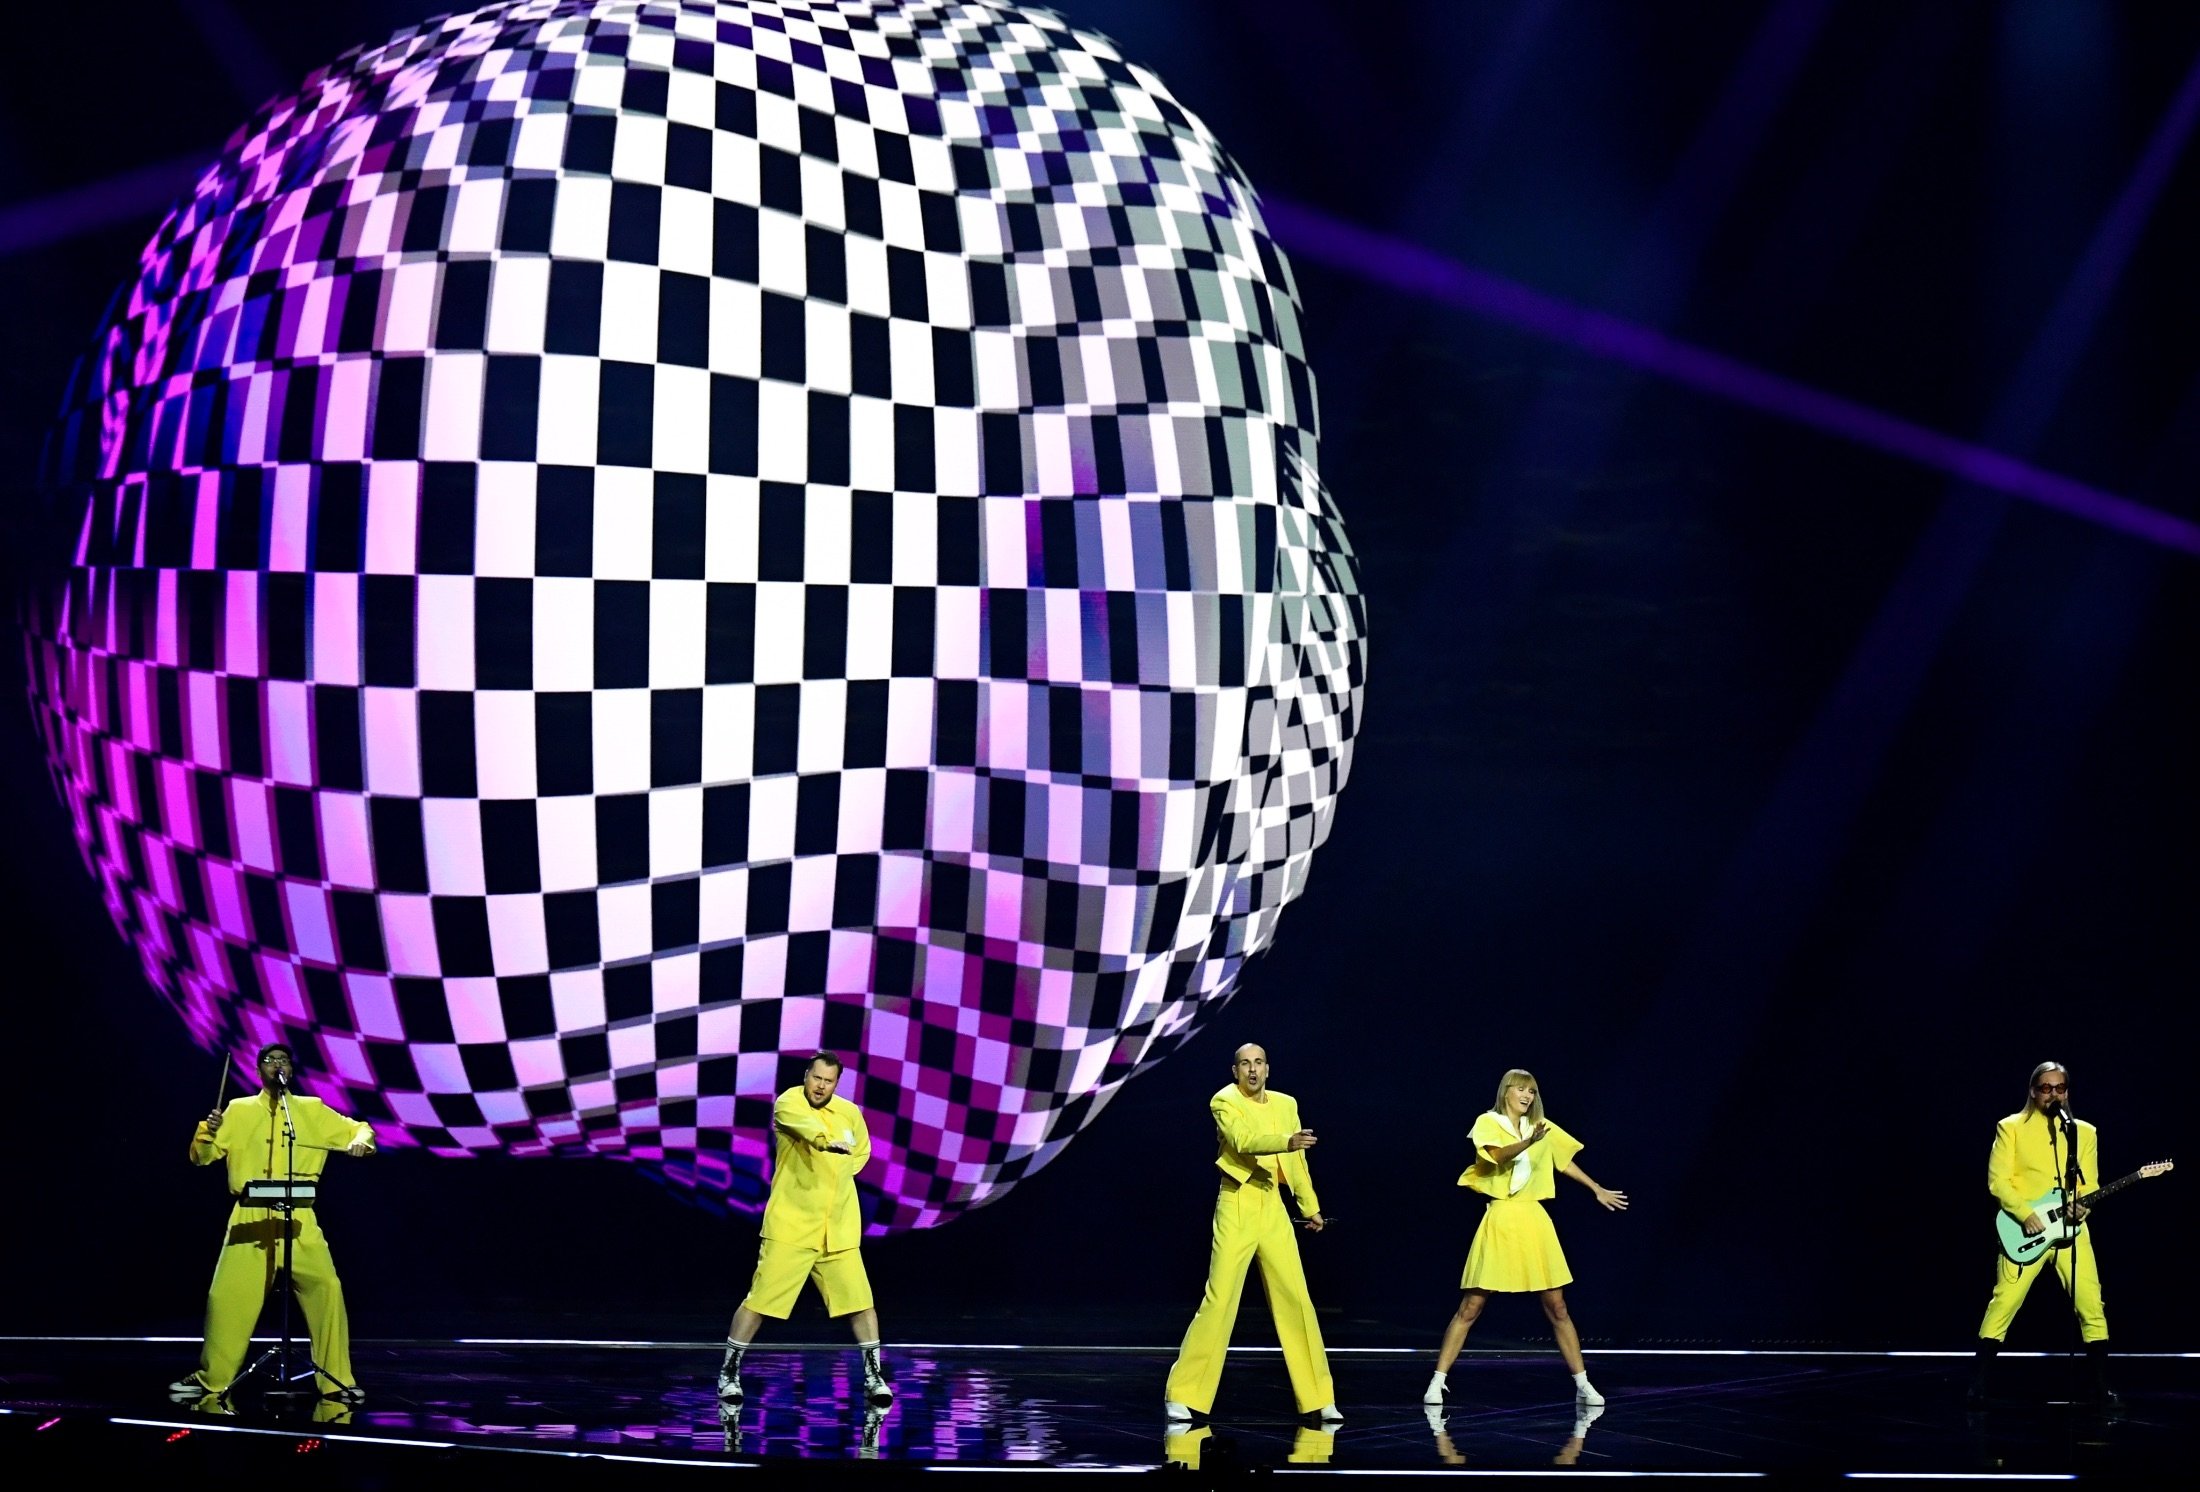 Contest participant The Roop of Lithuania performs during the Jury Grand Final dress rehearsal of the 2021 Eurovision Song Contest in Rotterdam, The Netherlands, May 21, 2021. (Reuters Photo)